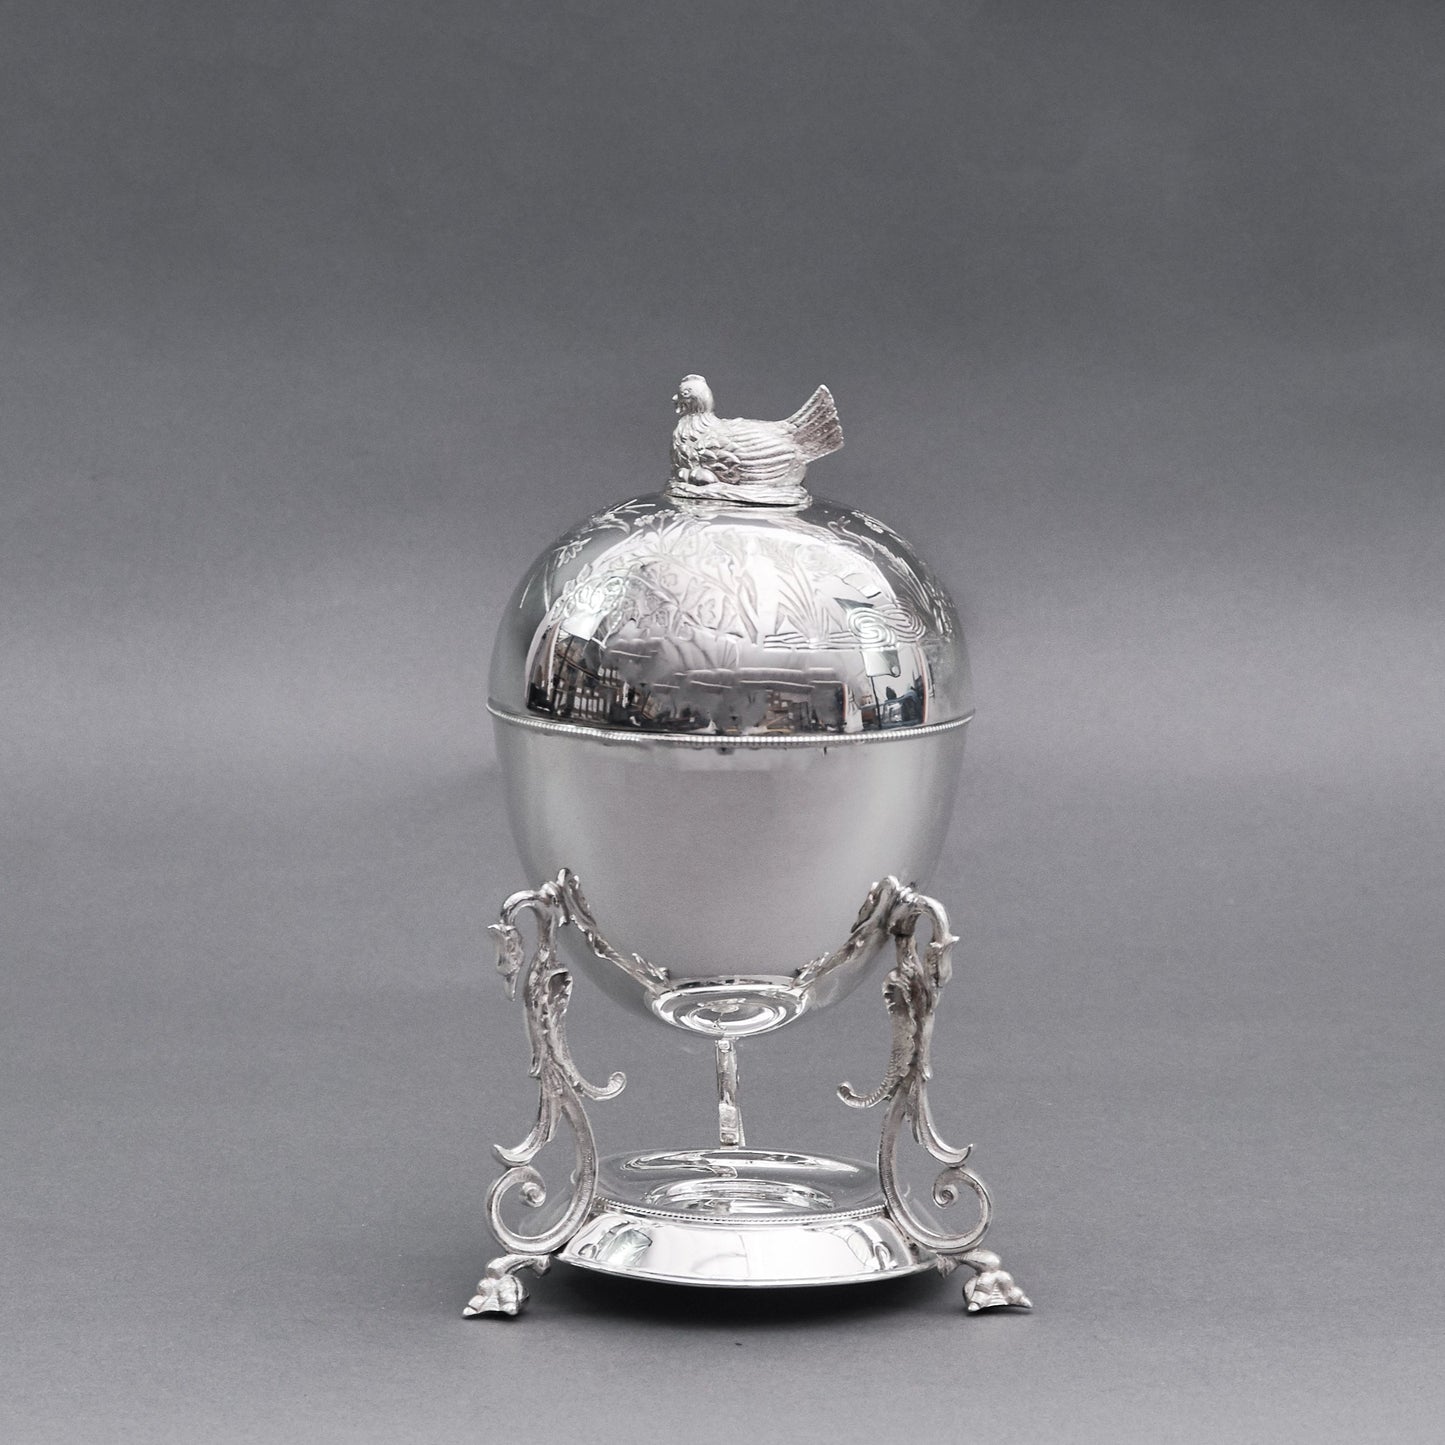 The Groom Ivan - Antique Silver Plated Egg Coddler With Chicken Top